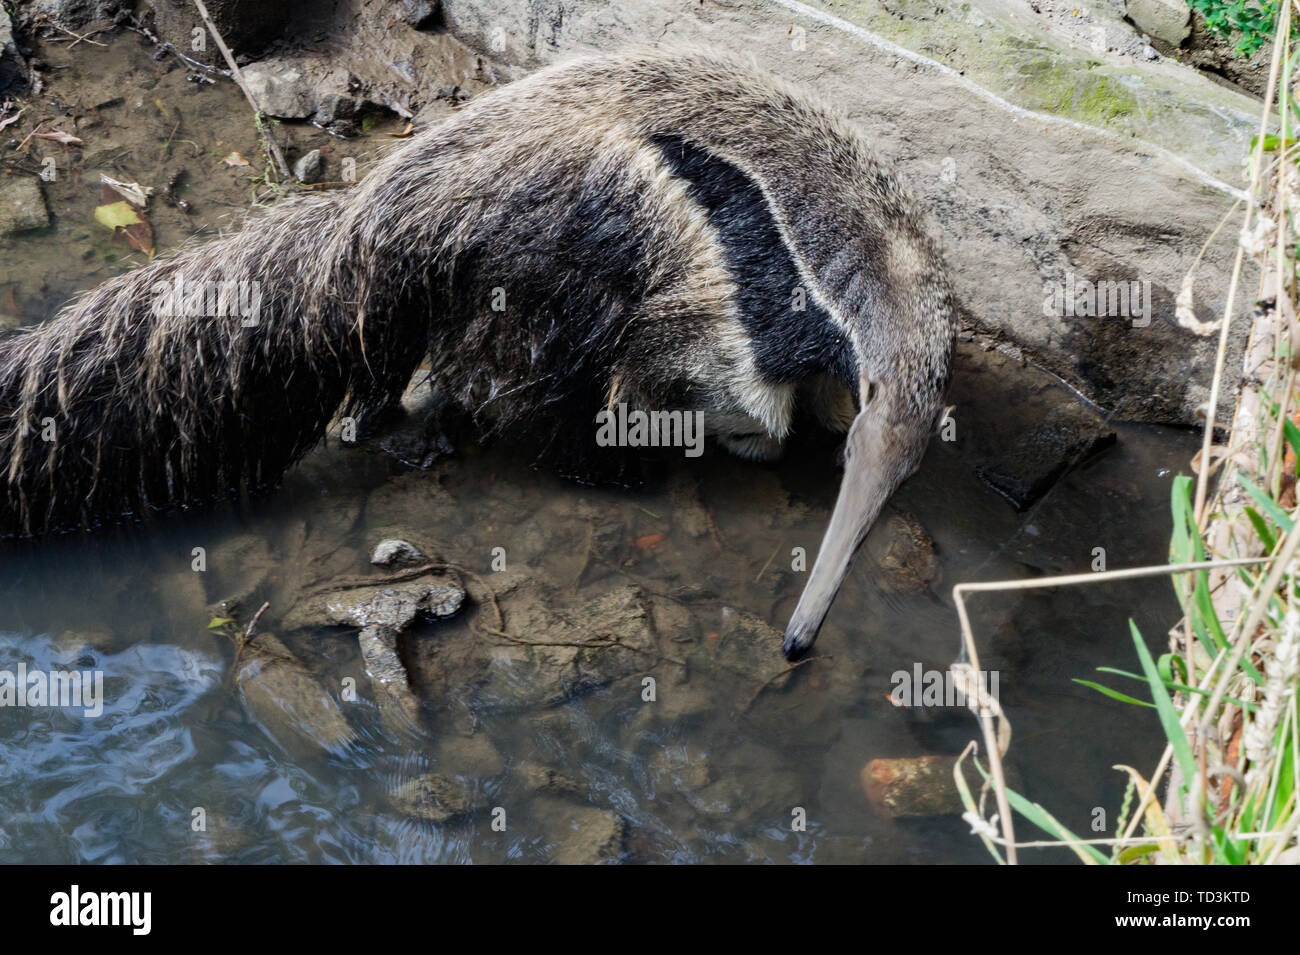 Anteater drinks in a river facing camera Stock Photo